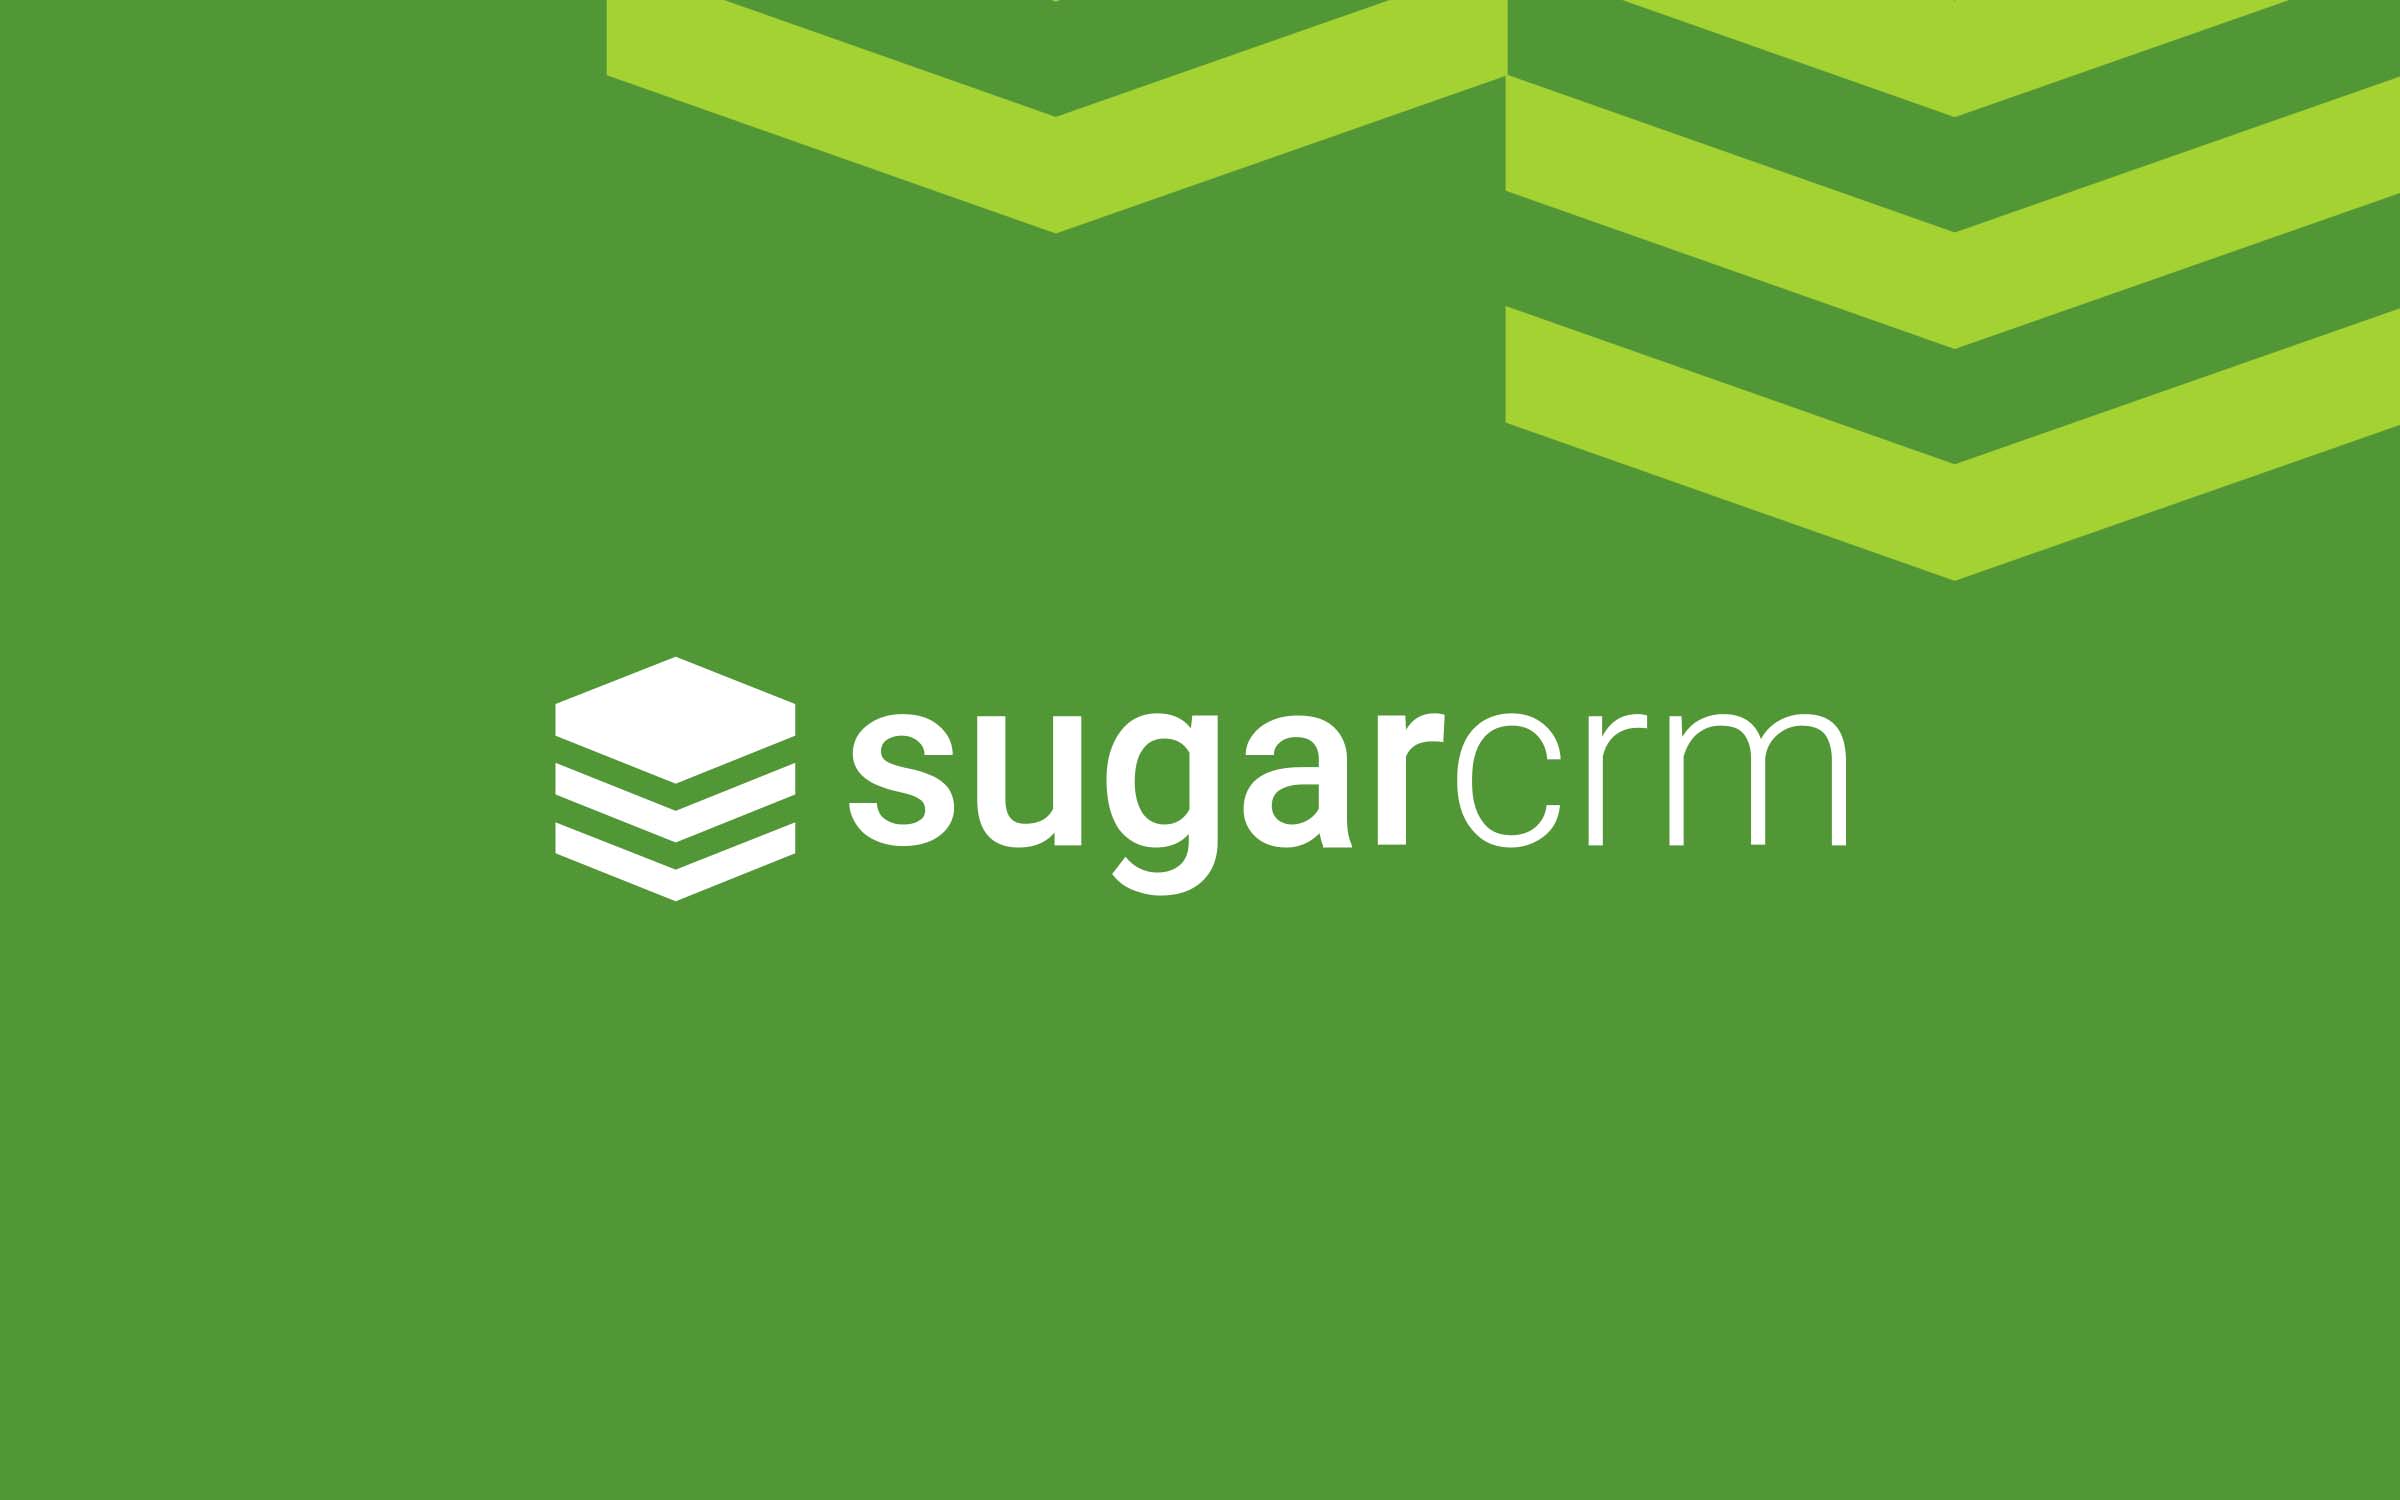 Global Web Services Firm MEGA Selects SugarCRM for Next-Gen Sales Automation to Supercharge Customer Acquisition